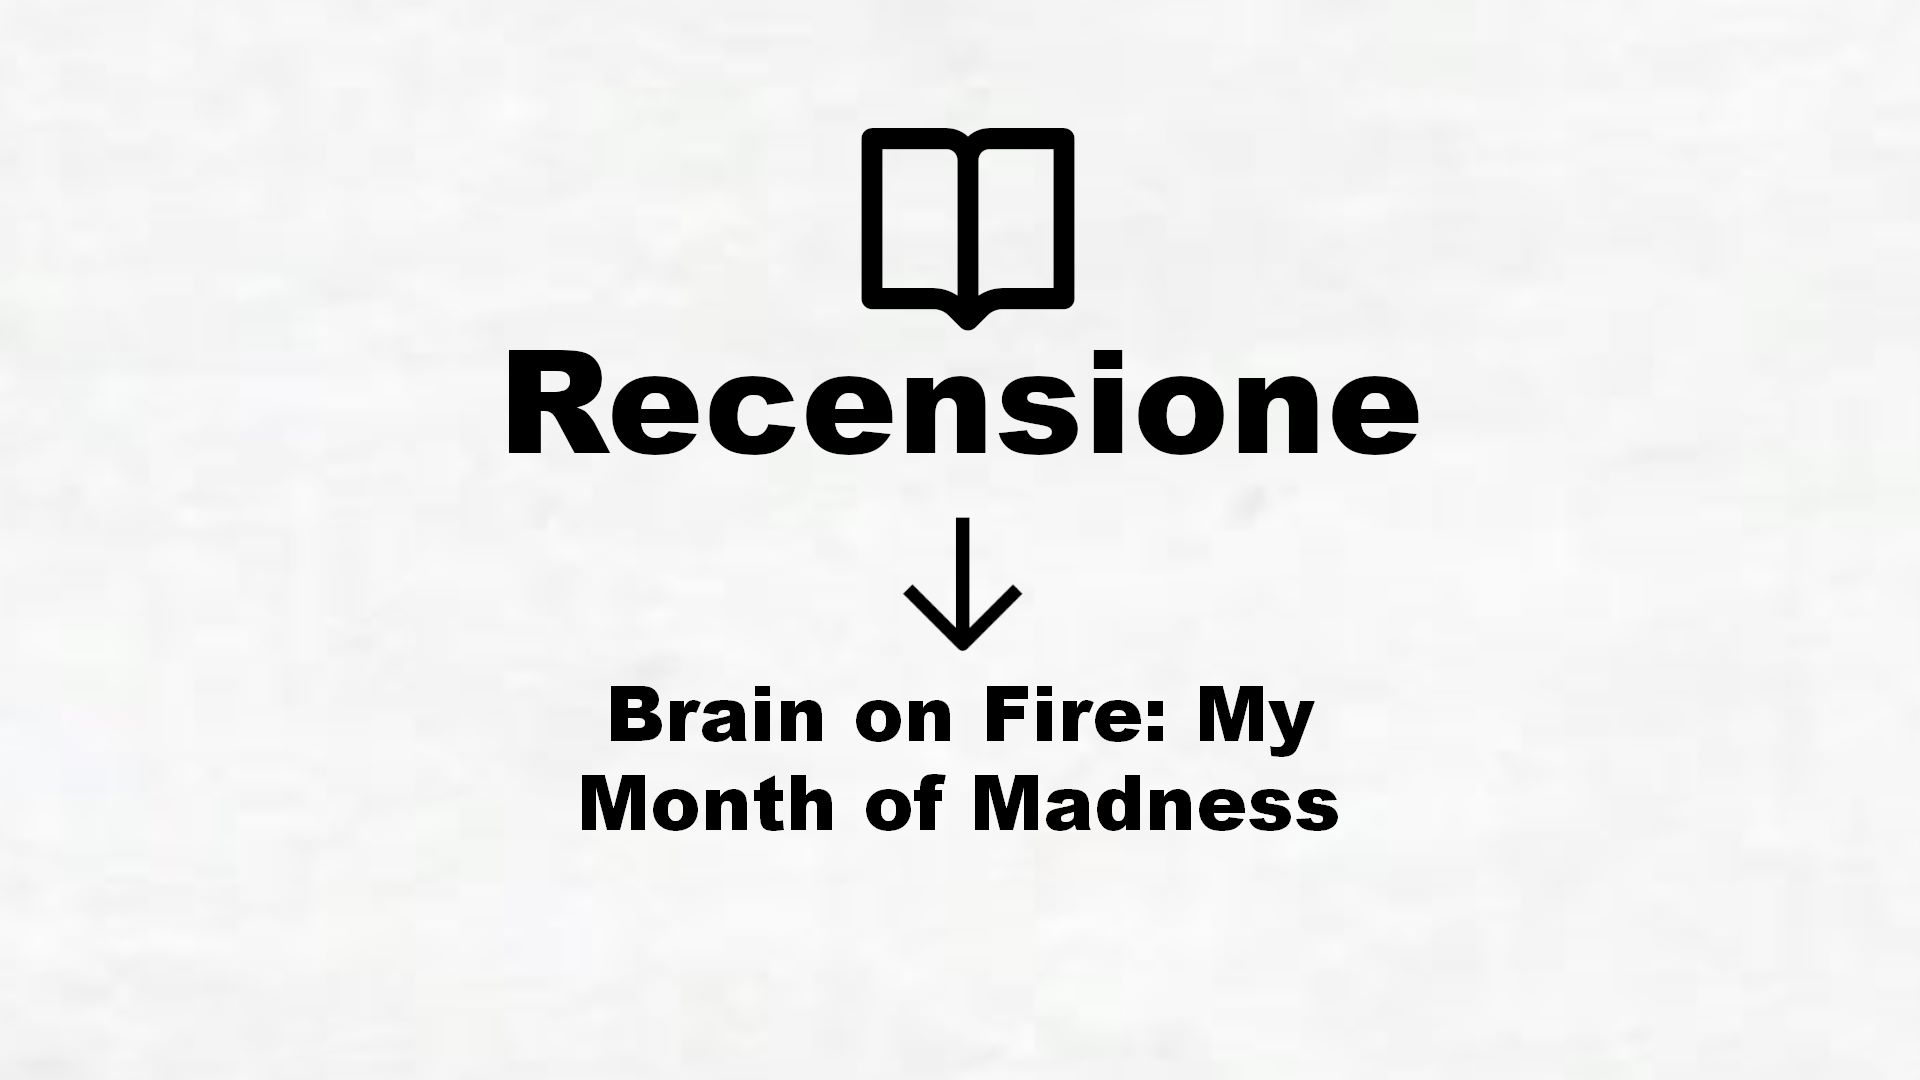 Brain on Fire: My Month of Madness – Recensione Libro